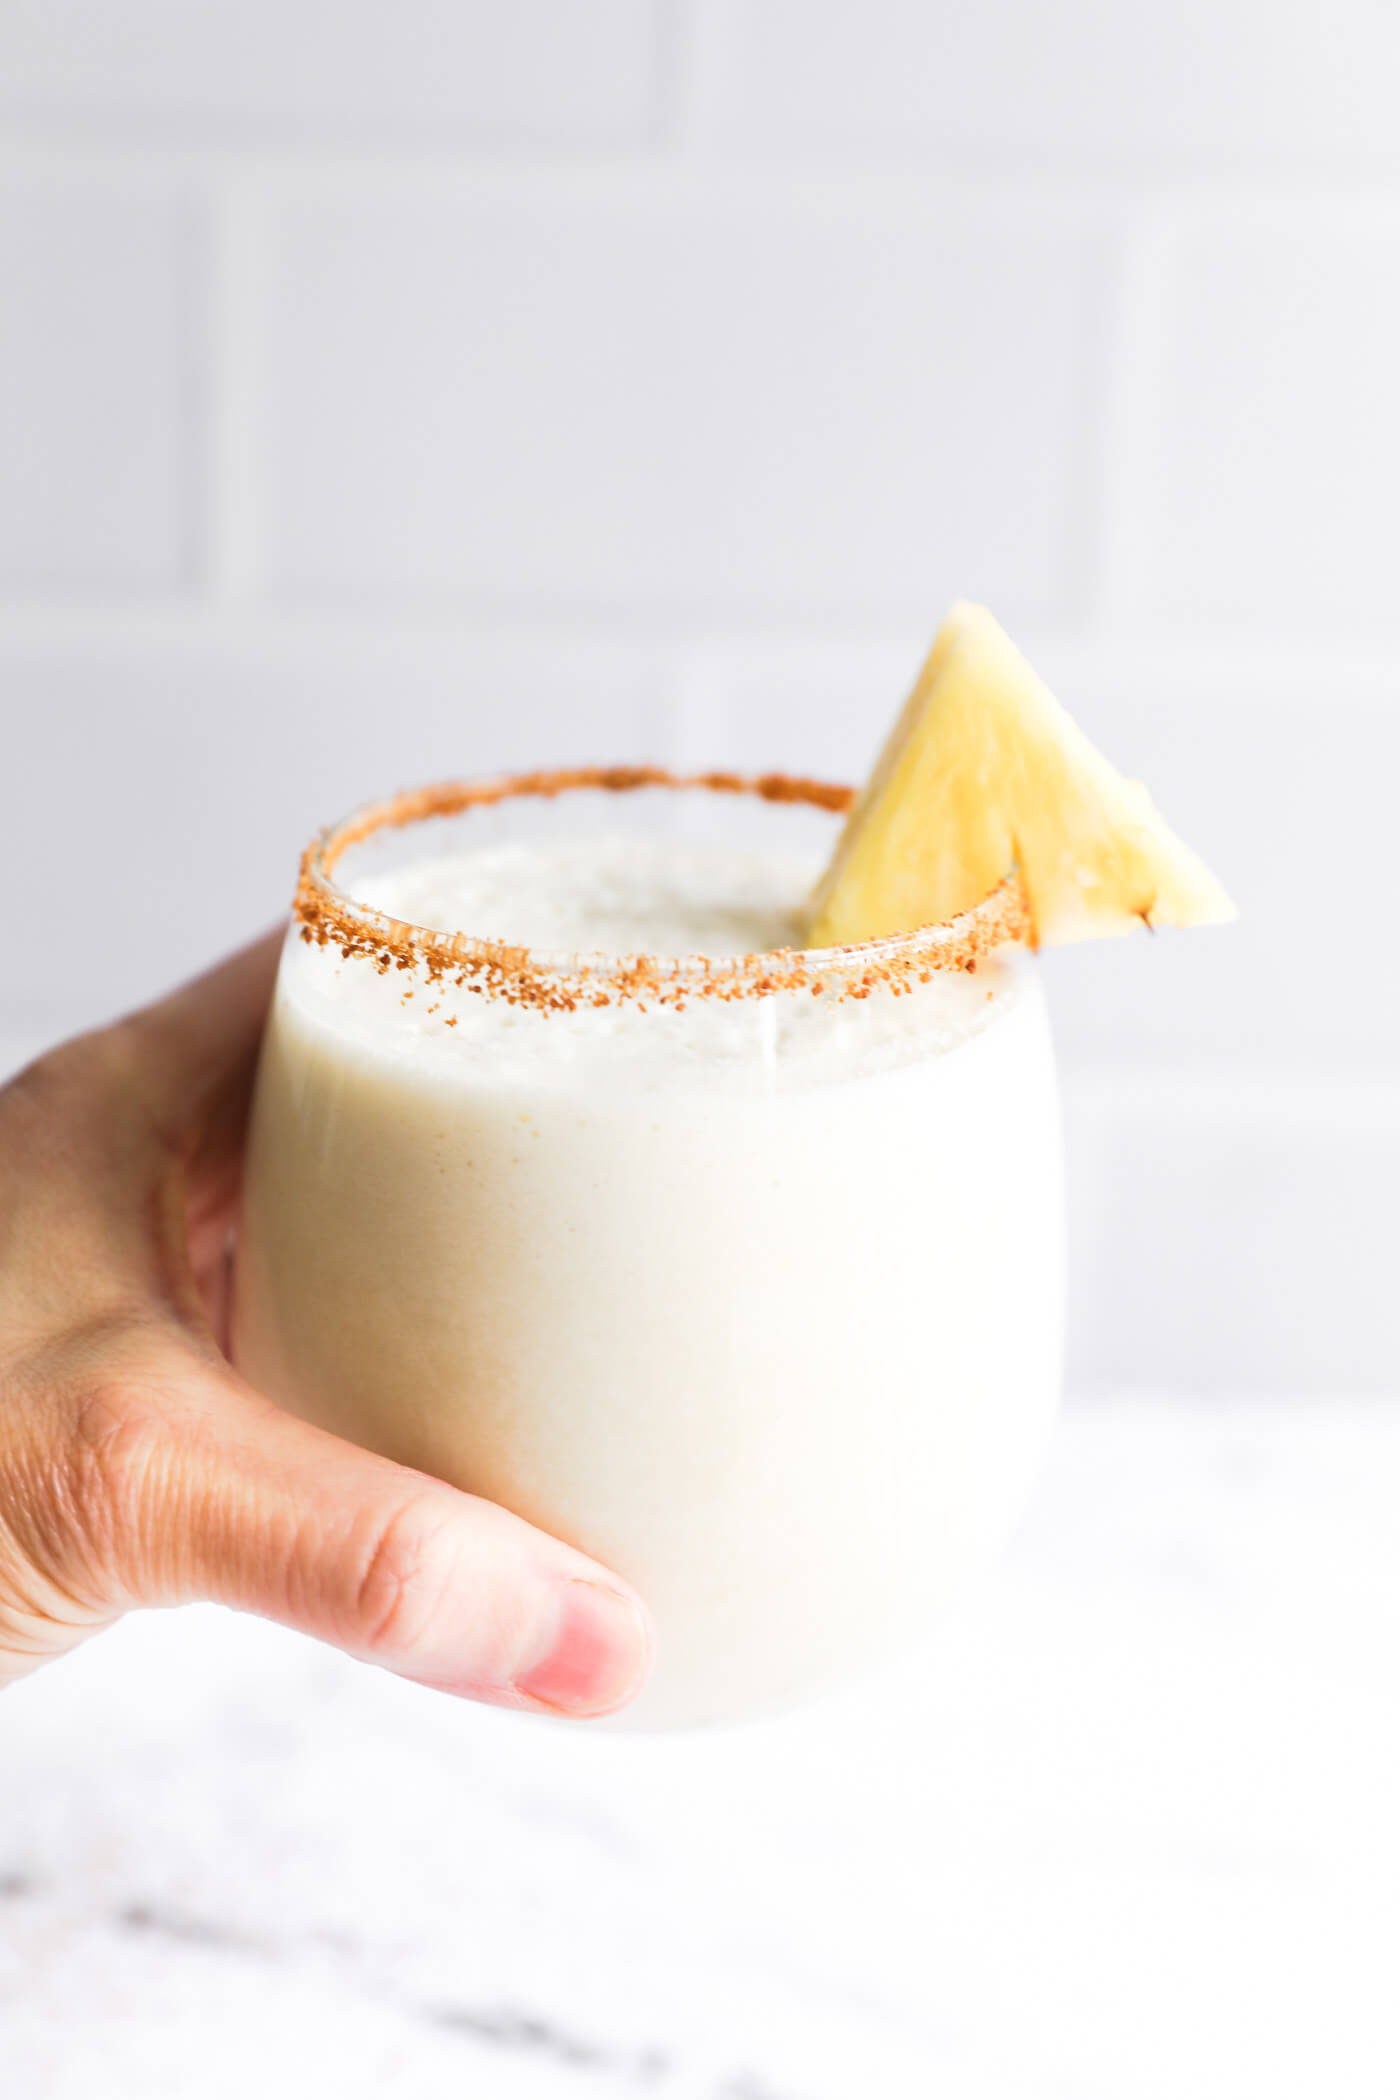 Holding a glass with a pina colada mocktail. Glass is lined with coconut sugar and a slice of pineapple.